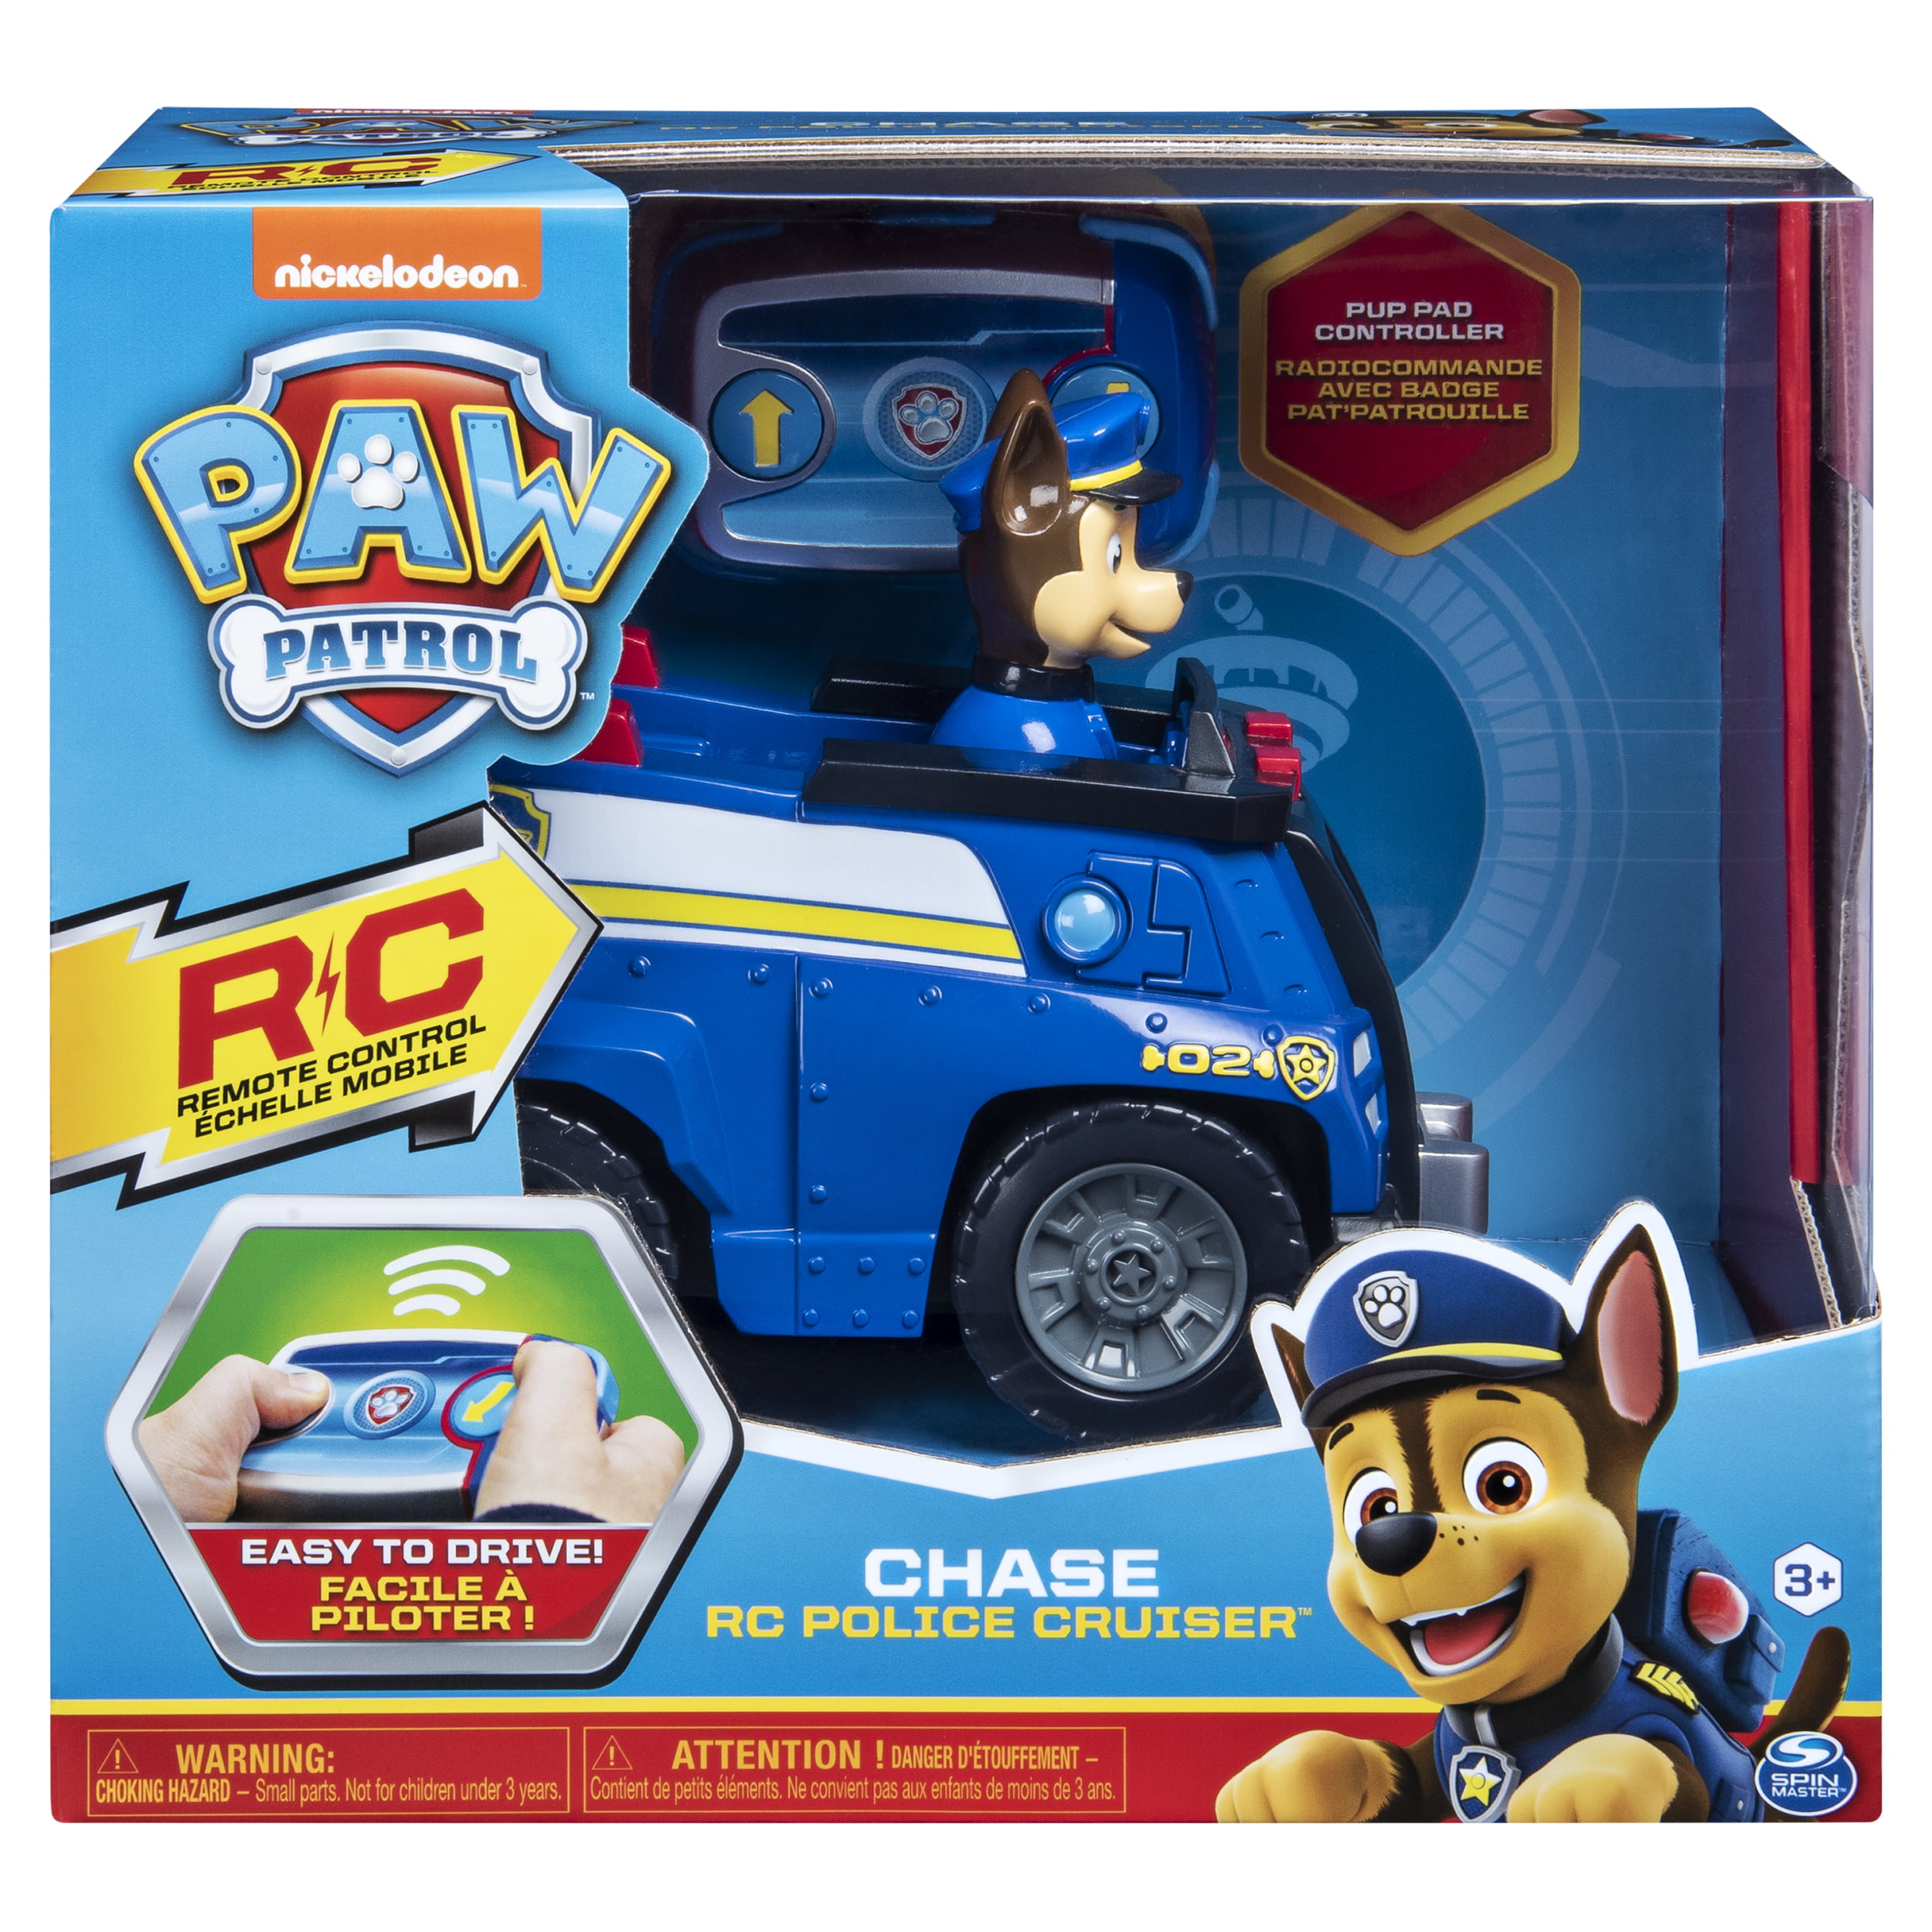 Patrol, Chase Remote Control Cruiser with 2-Way Steering, for Kids Aged 3 Up - Walmart.com